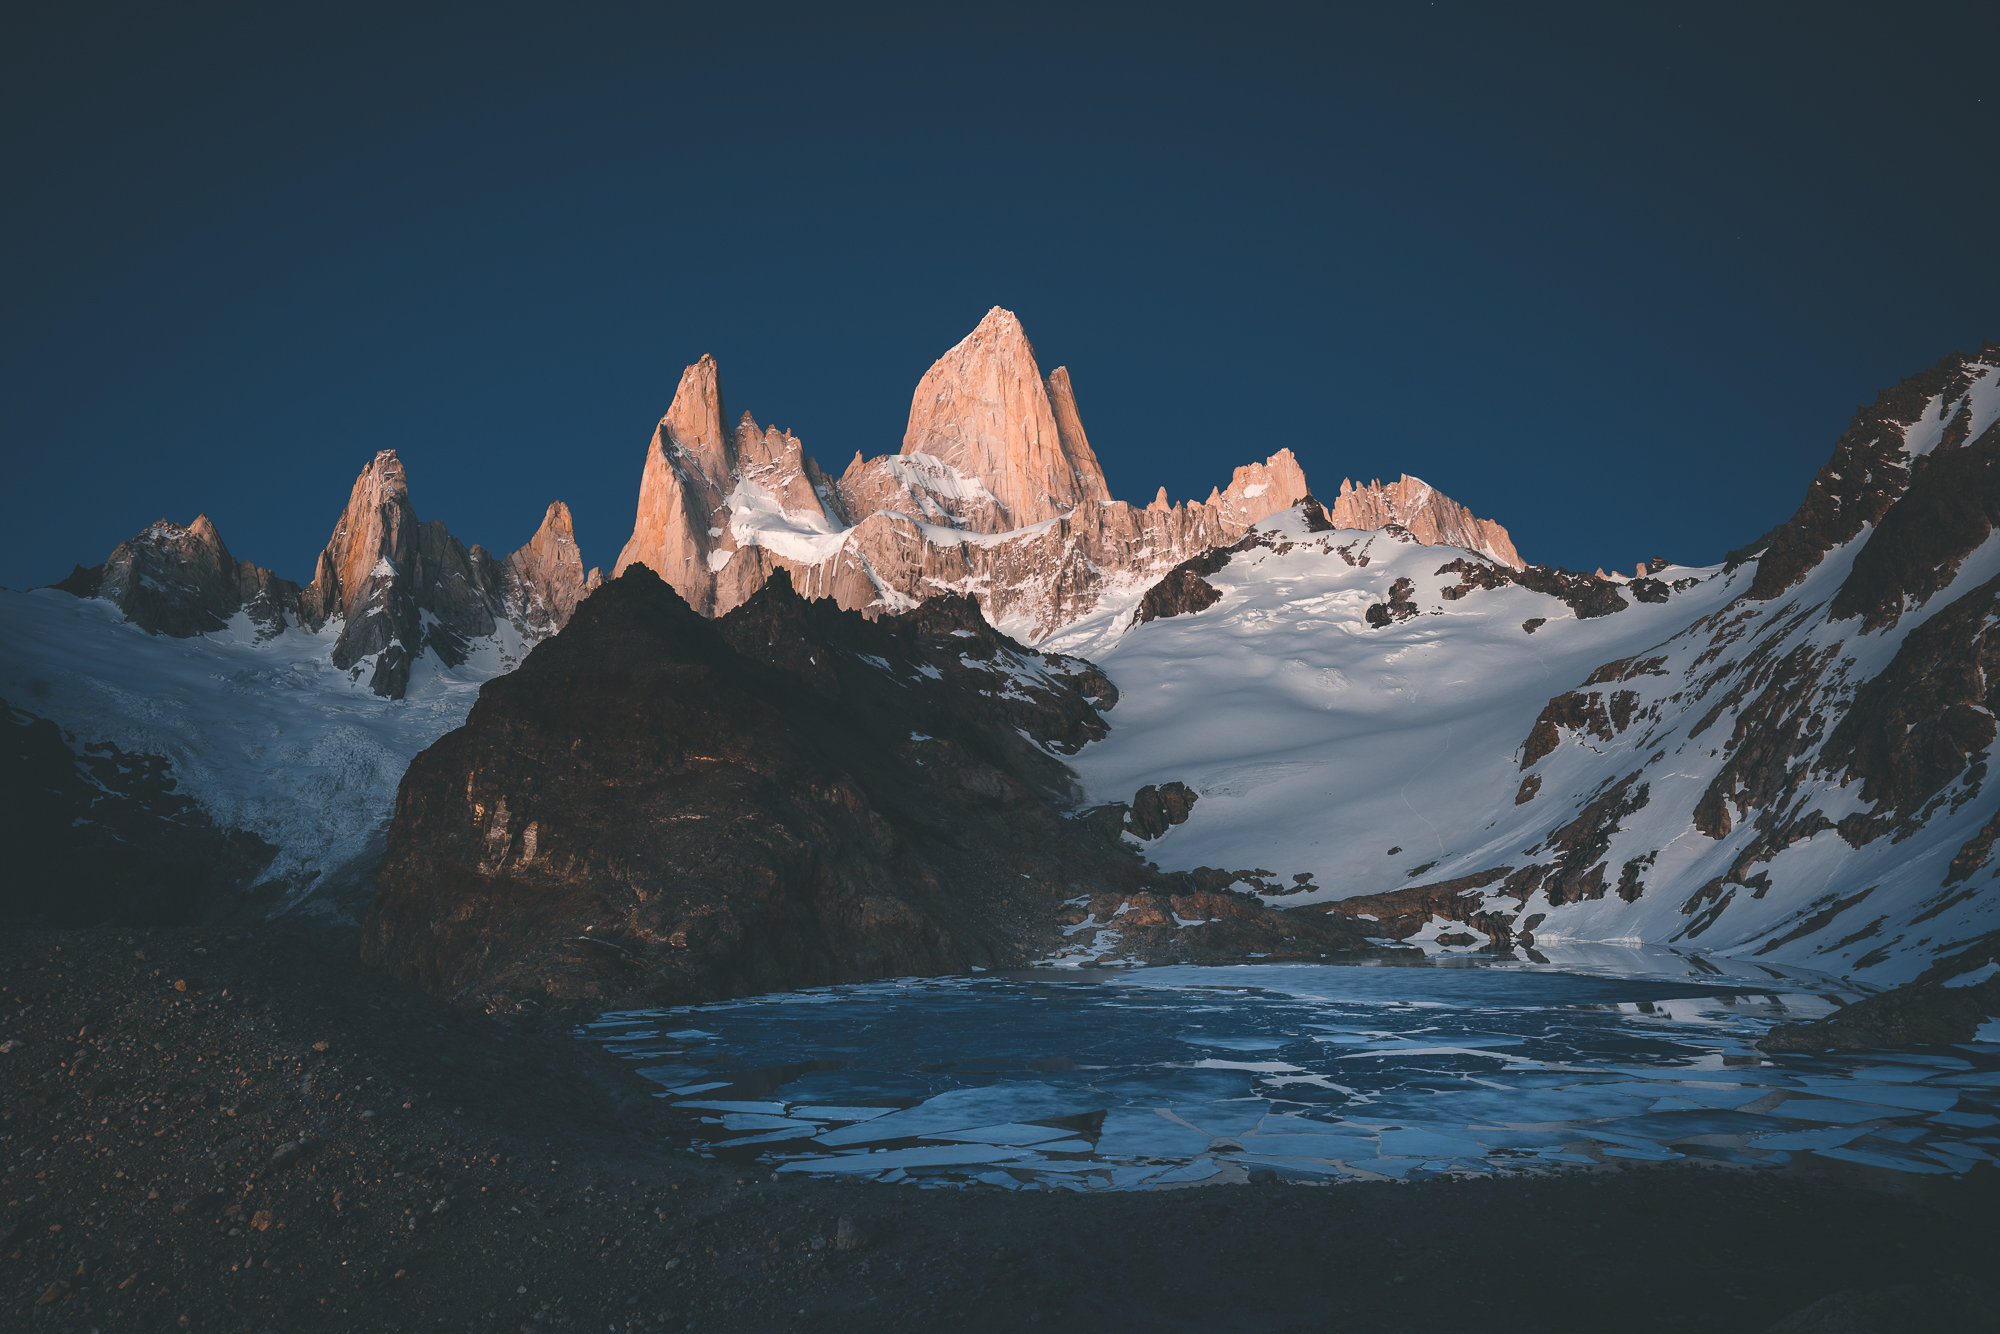 Patagonia in Pictures